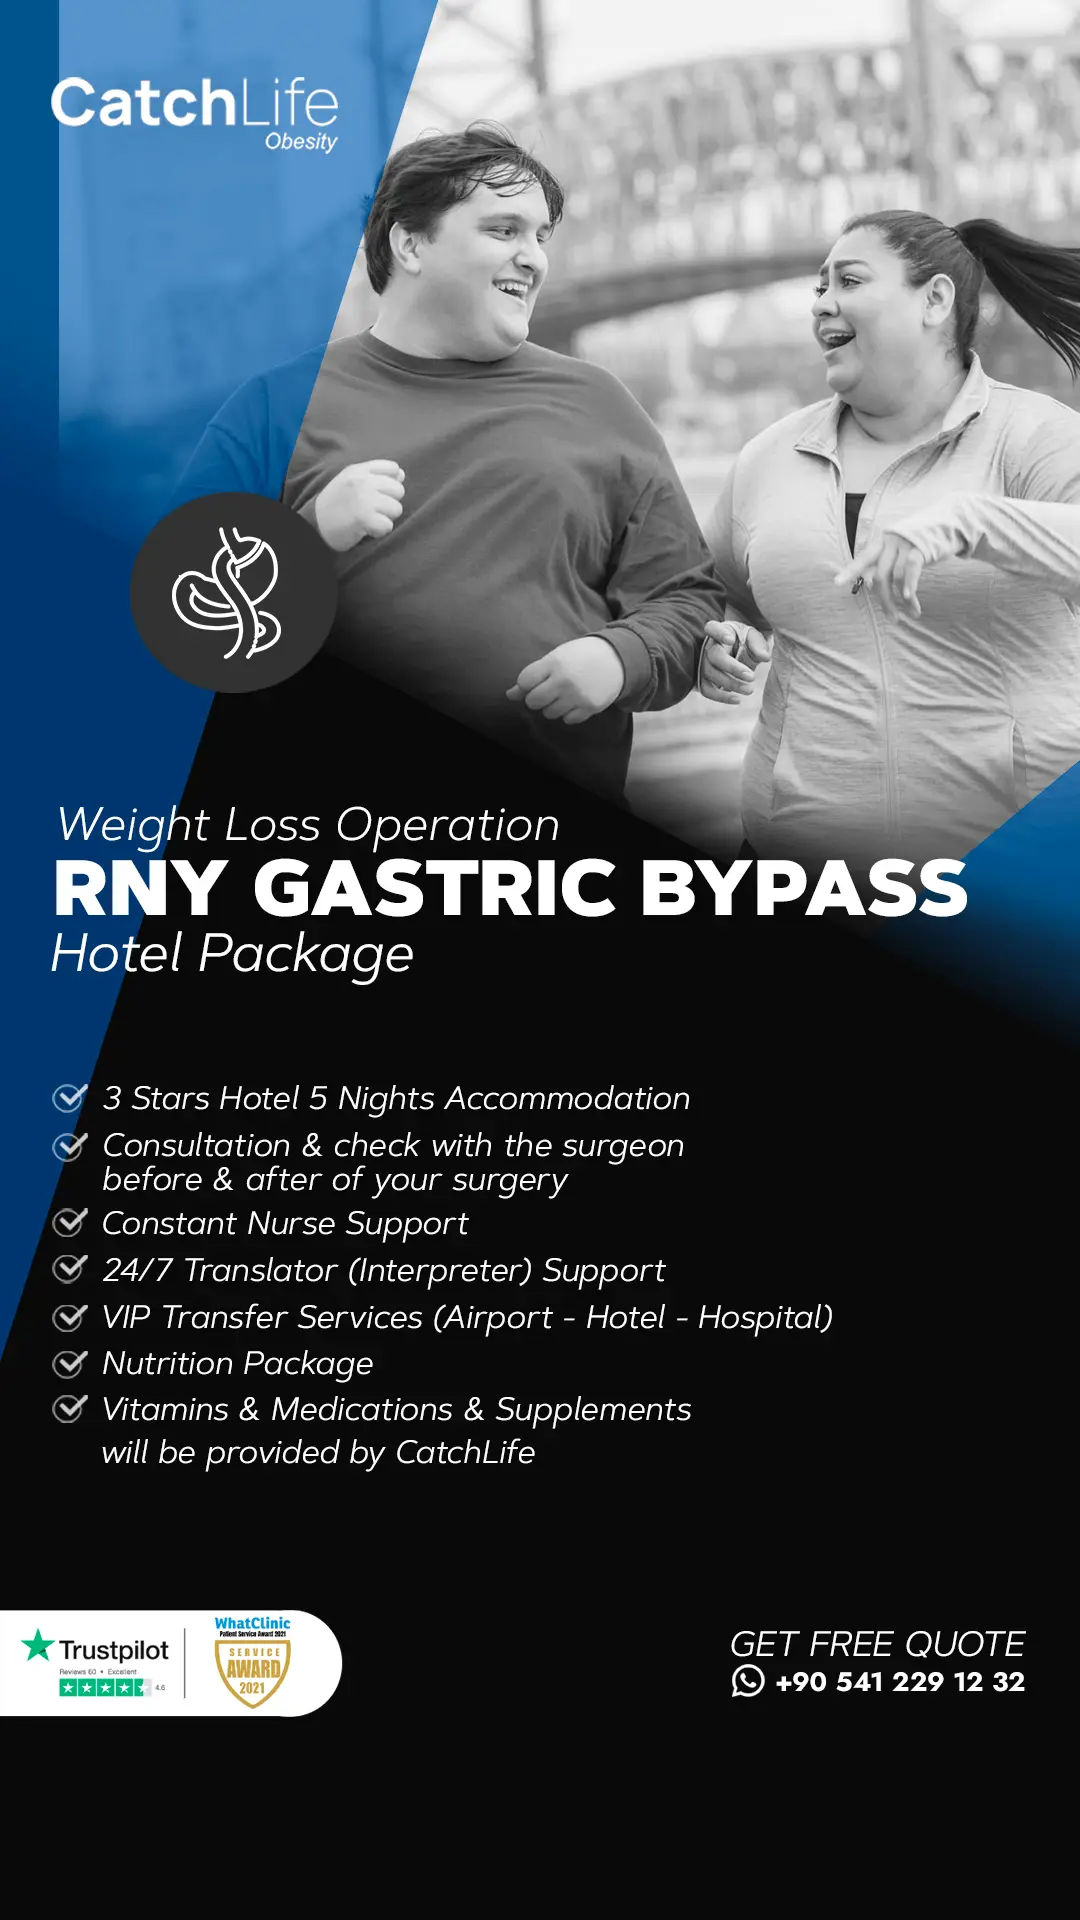 gastric-bypass-hotel-package-turkey-img